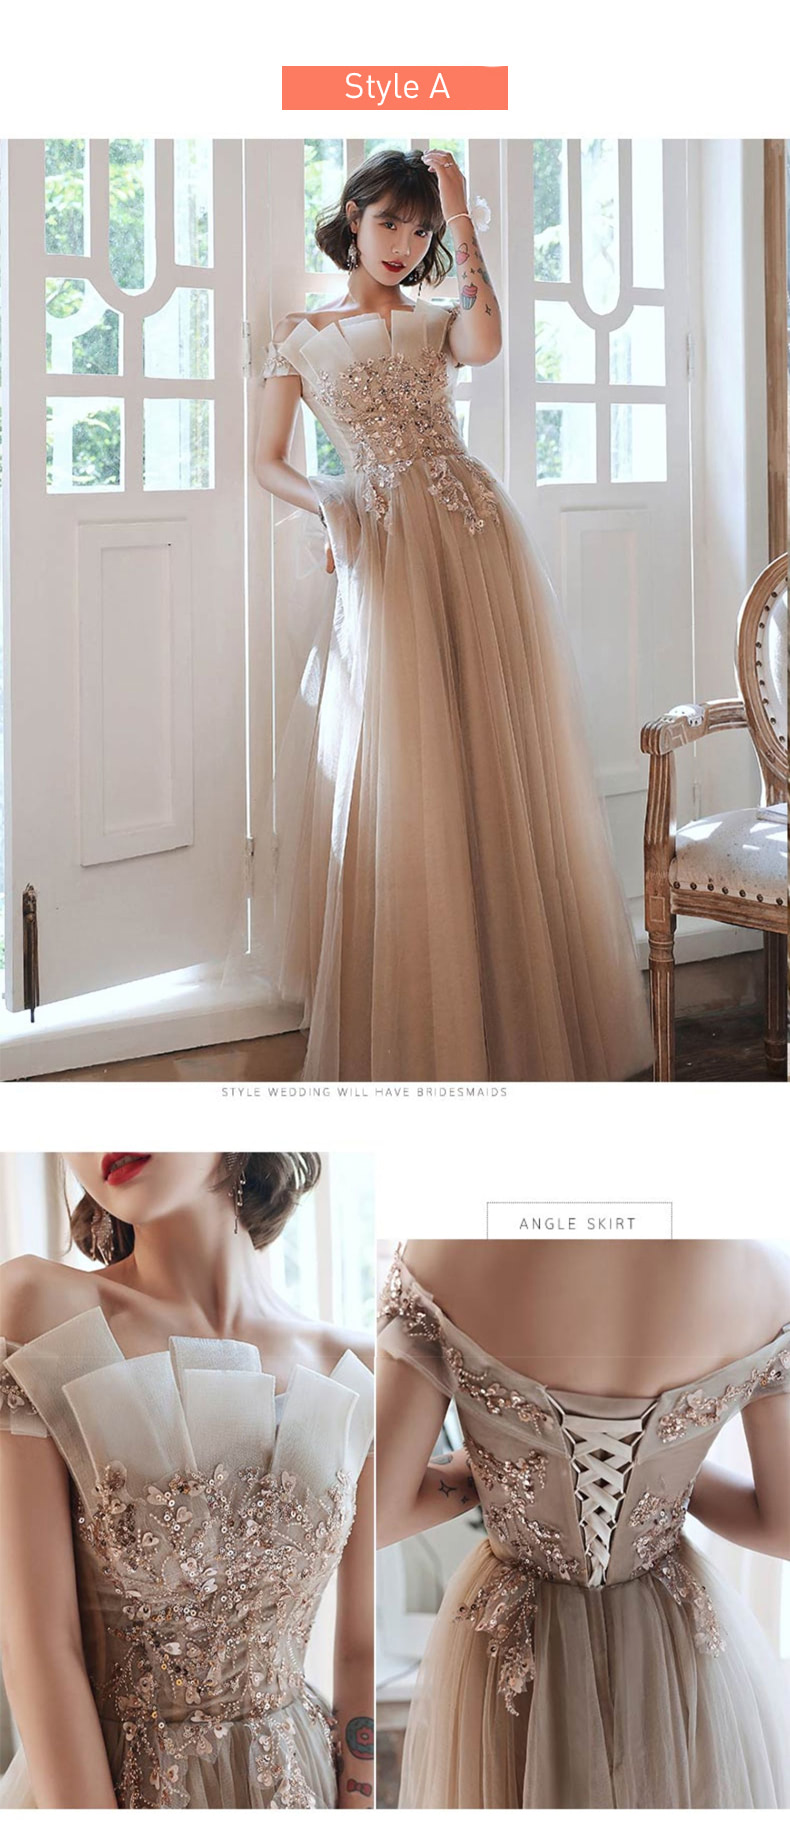 Charming-Embroidery-Ruffle-Lace-Long-Bridesmaid-Dress-Ball-Gown14.jpg